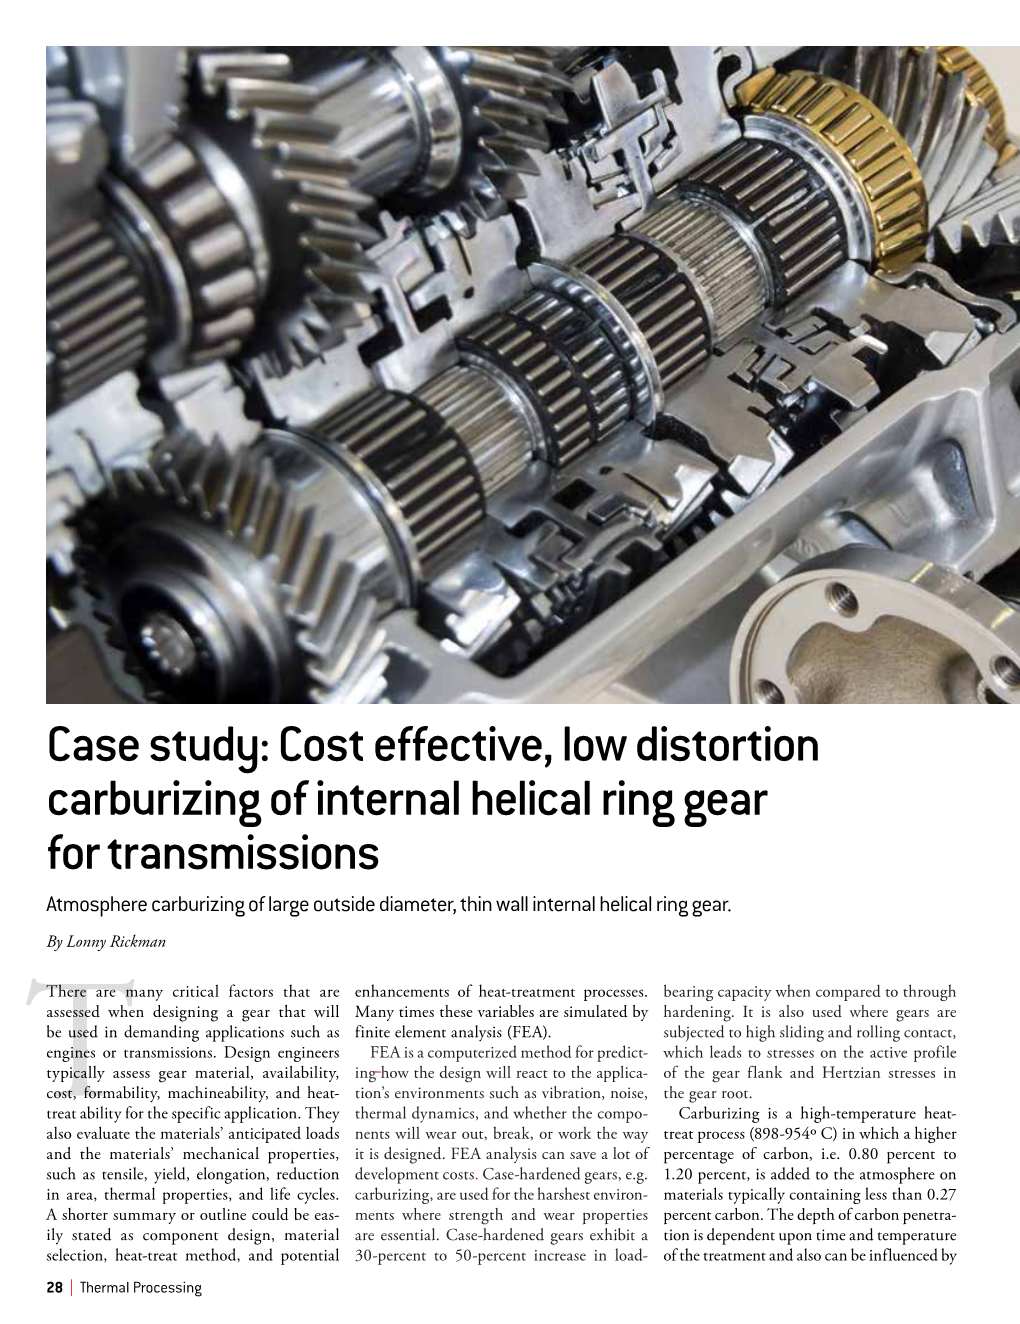 Case Study: Cost Effective, Low Distortion Carburizing of Internal